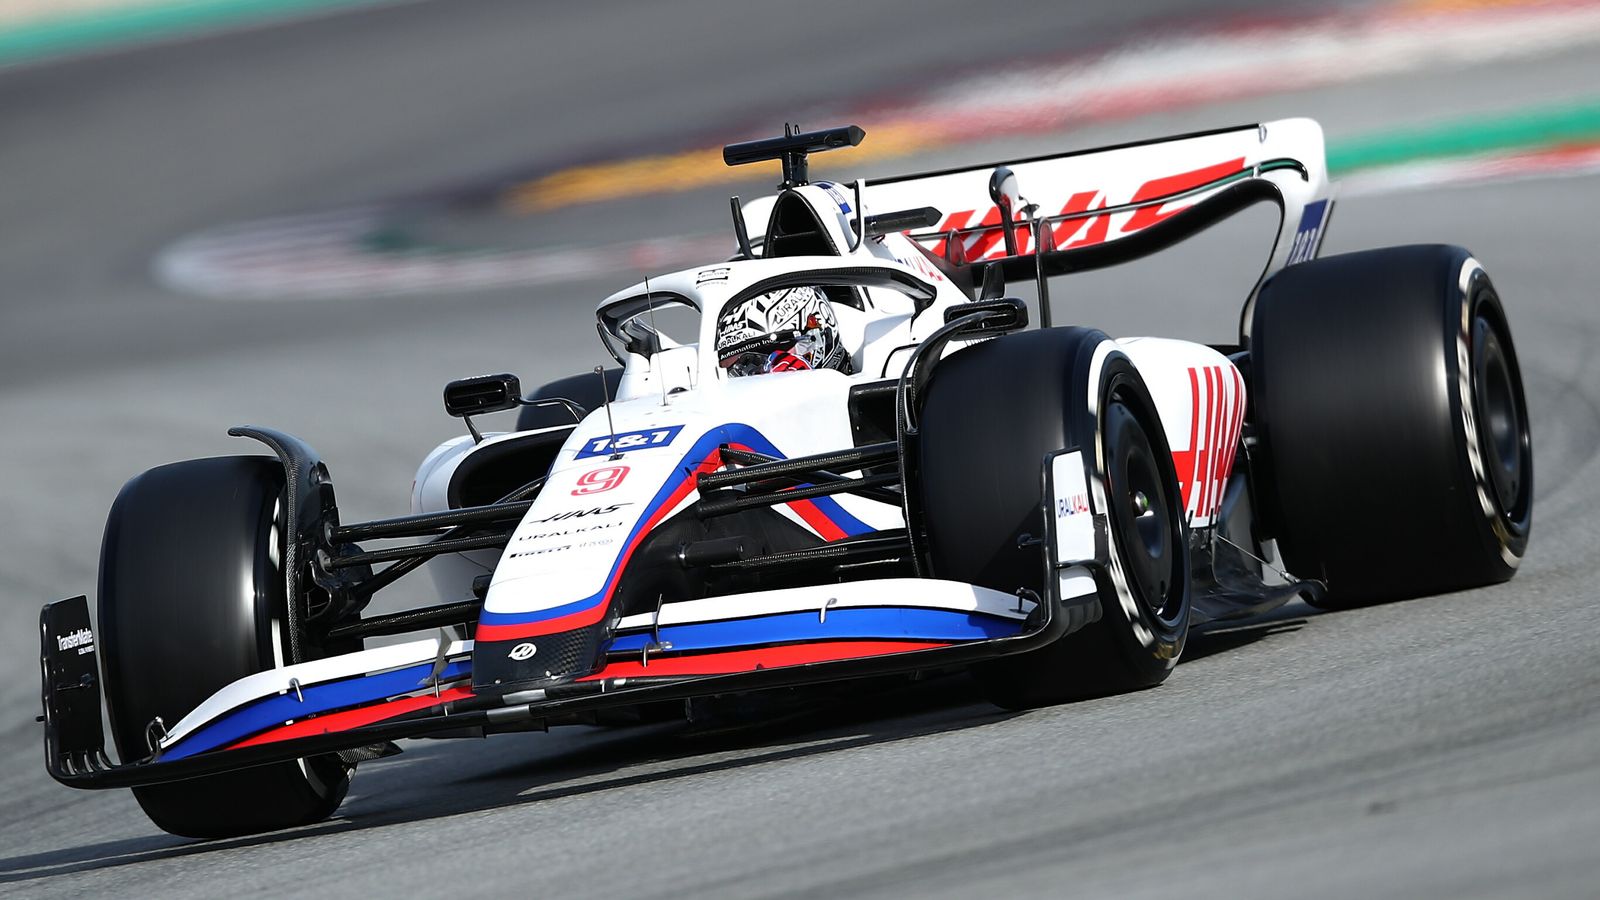  Haas drop Russian sponsor for final day of testing in Barcelona;  will run all-white car
